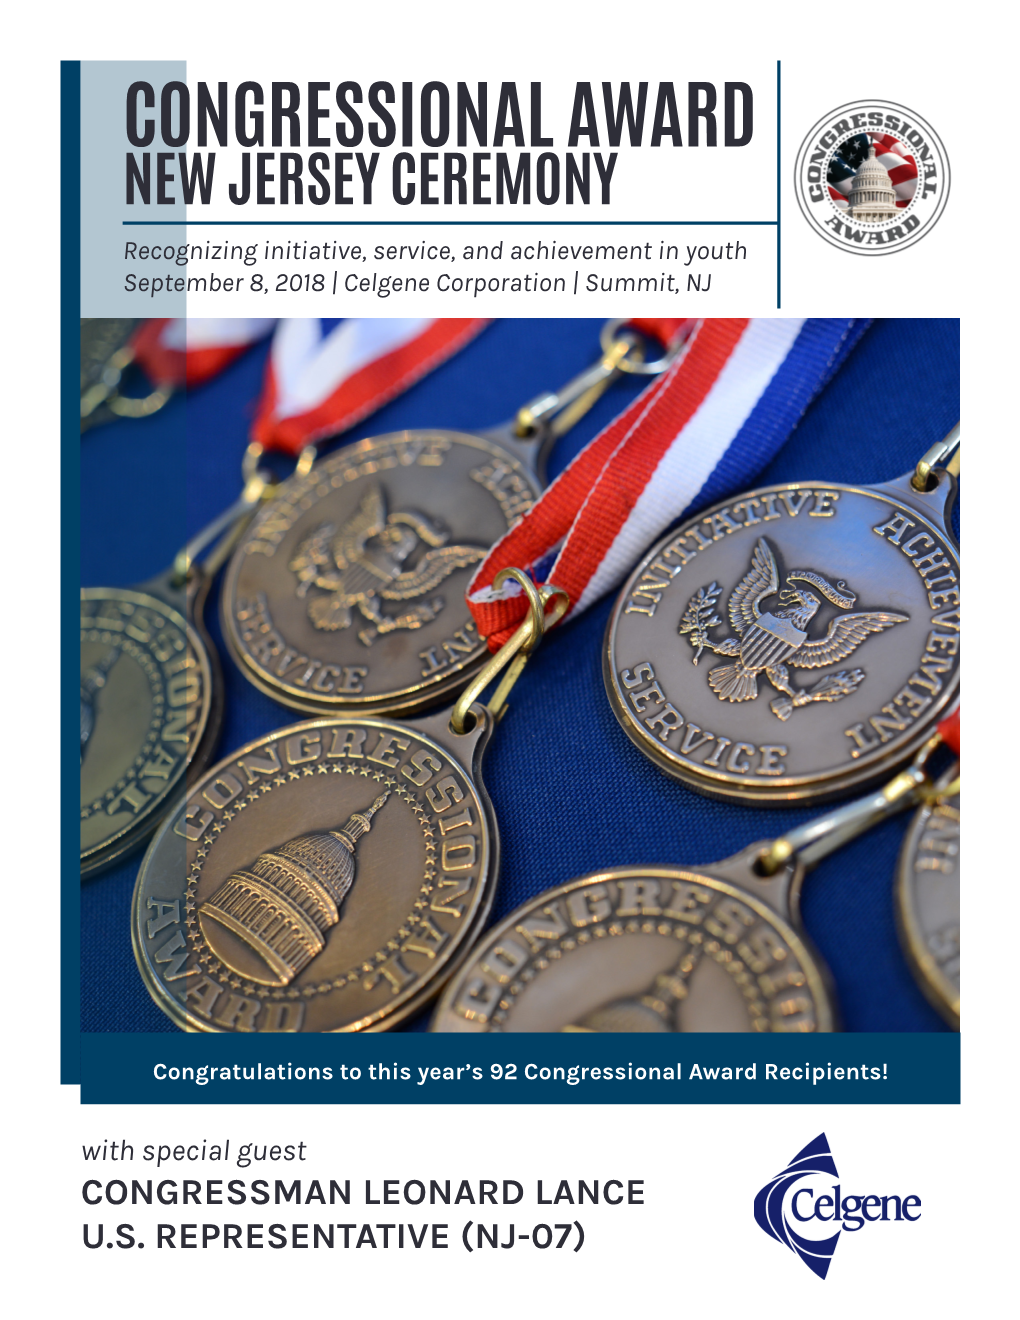 NEW JERSEY CEREMONY Recognizing Initiative, Service, and Achievement in Youth September 8, 2018 | Celgene Corporation | Summit, NJ